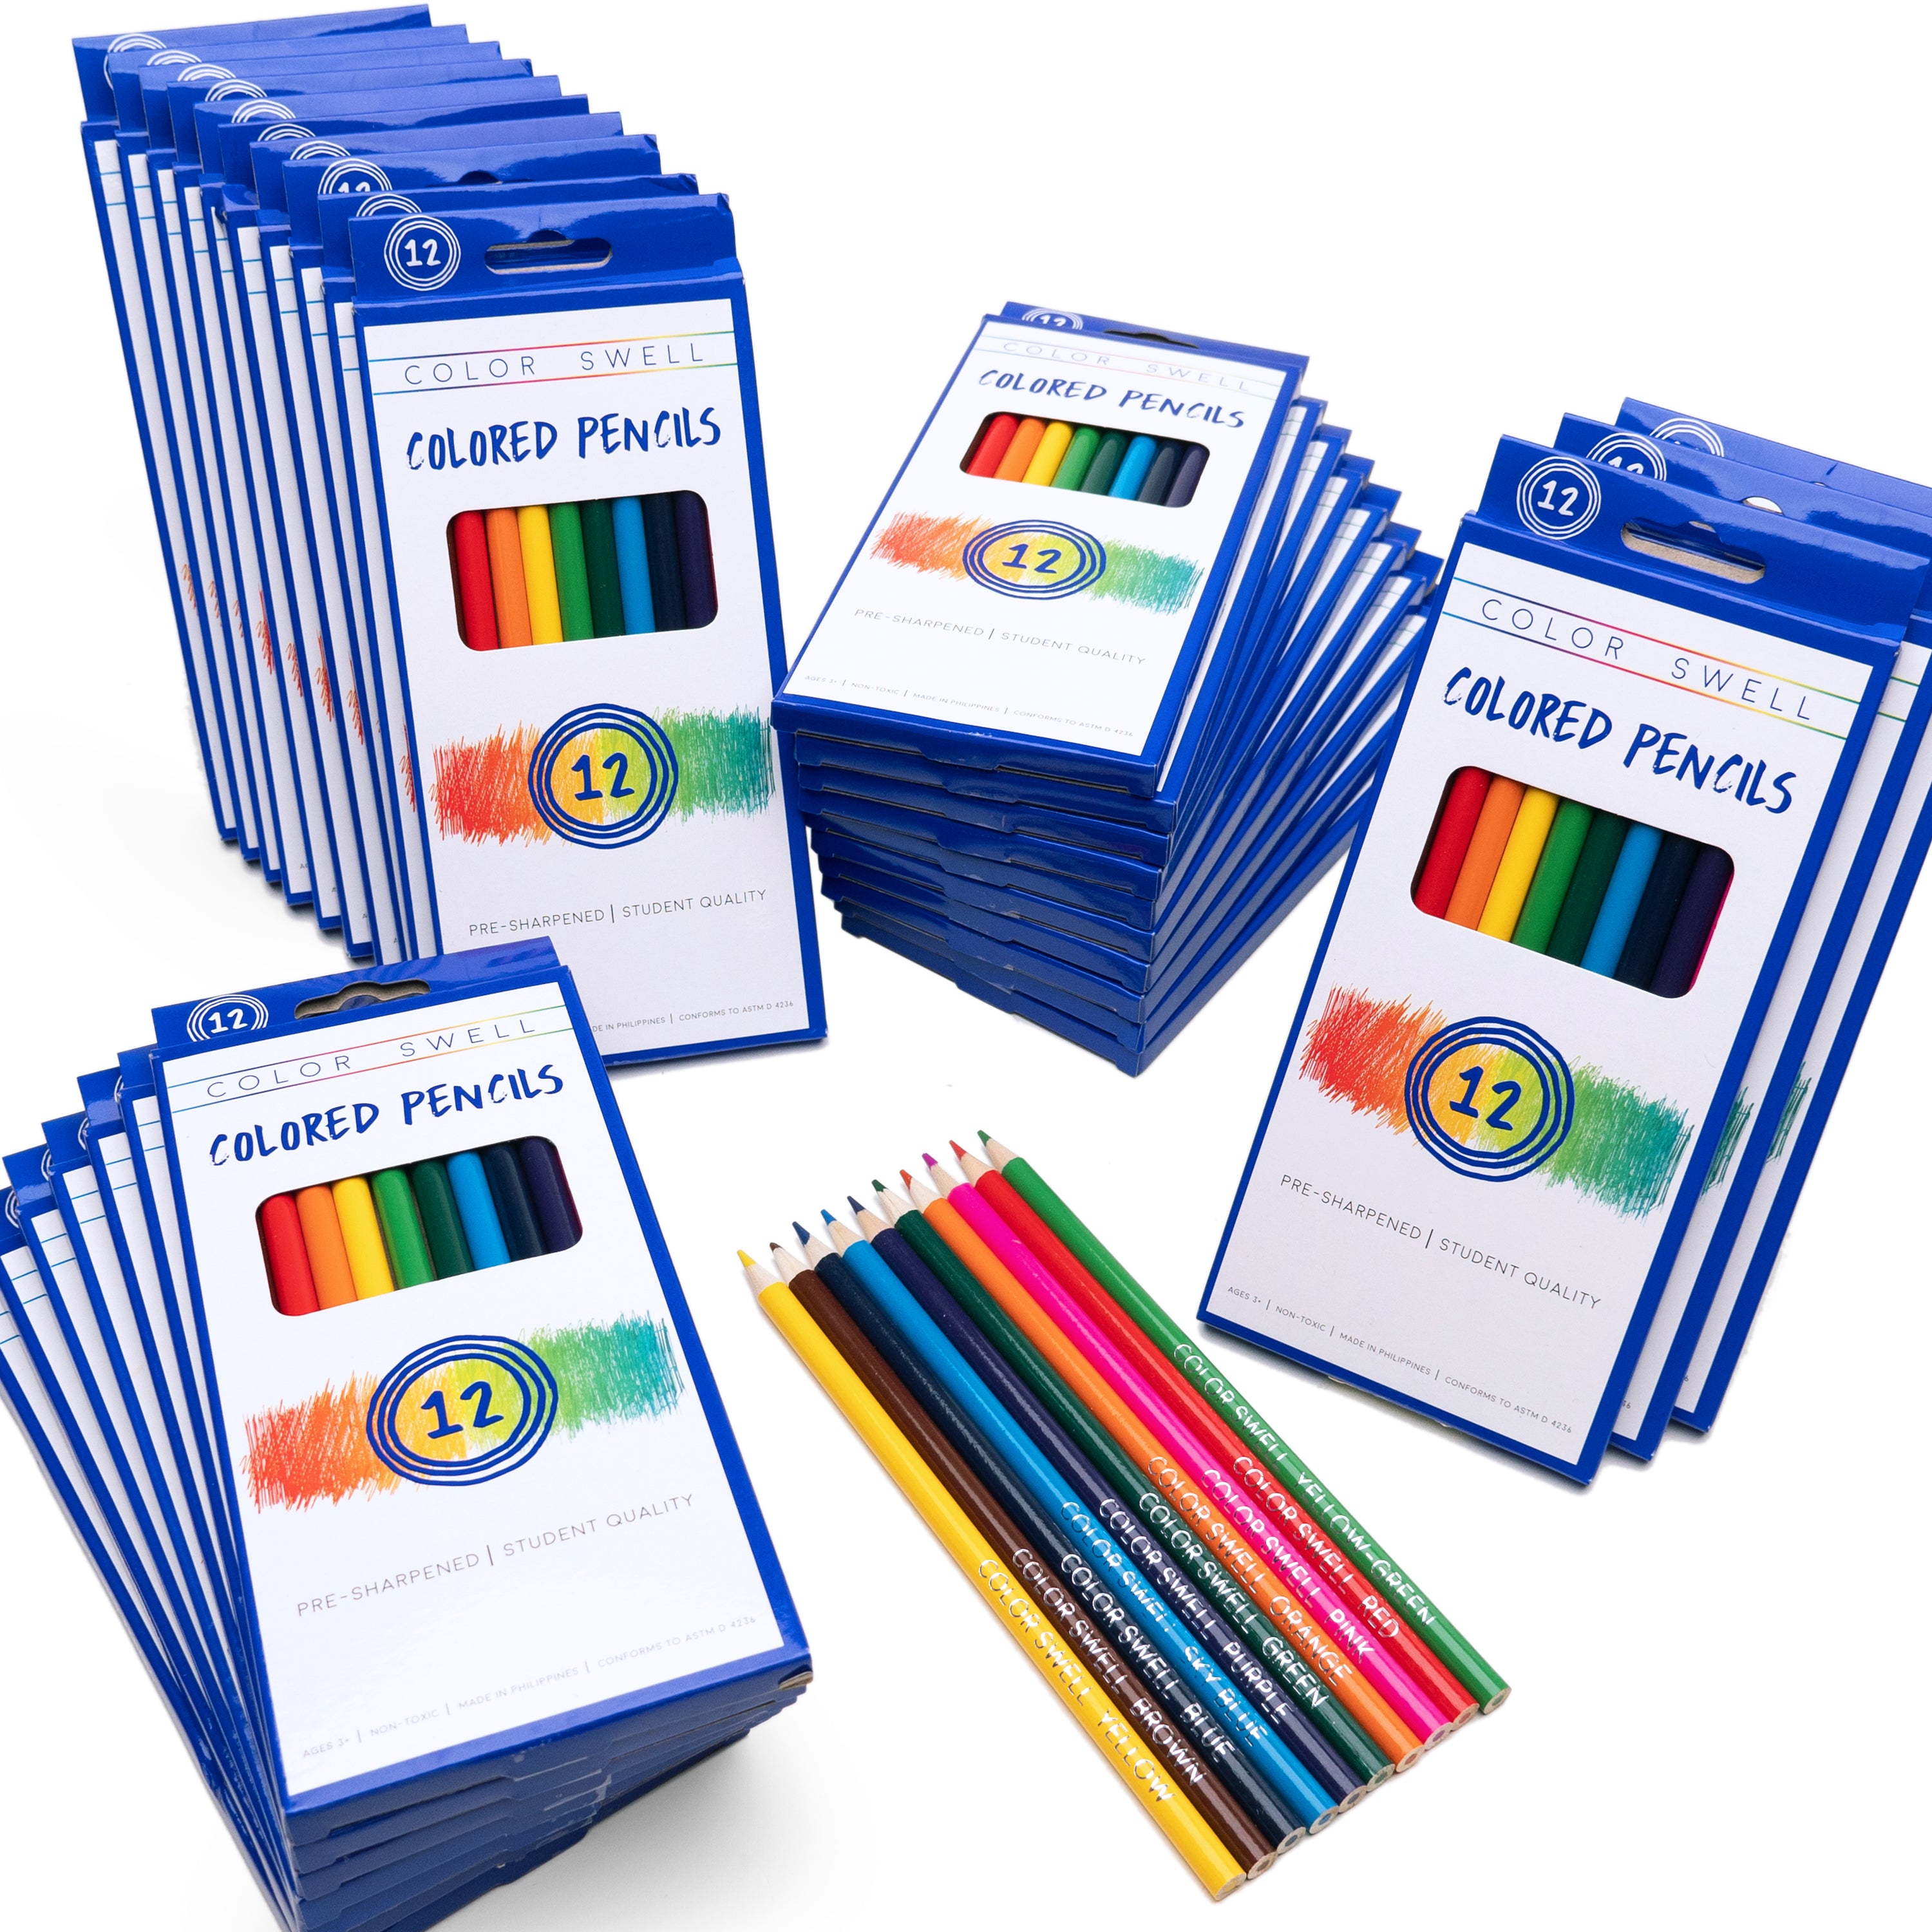 Trail maker 250 Colored Pencils Bulk Packs for Classrooms, Artists, Kids,  Adult Coloring | 25 Pack Colored Pencils in Bulk